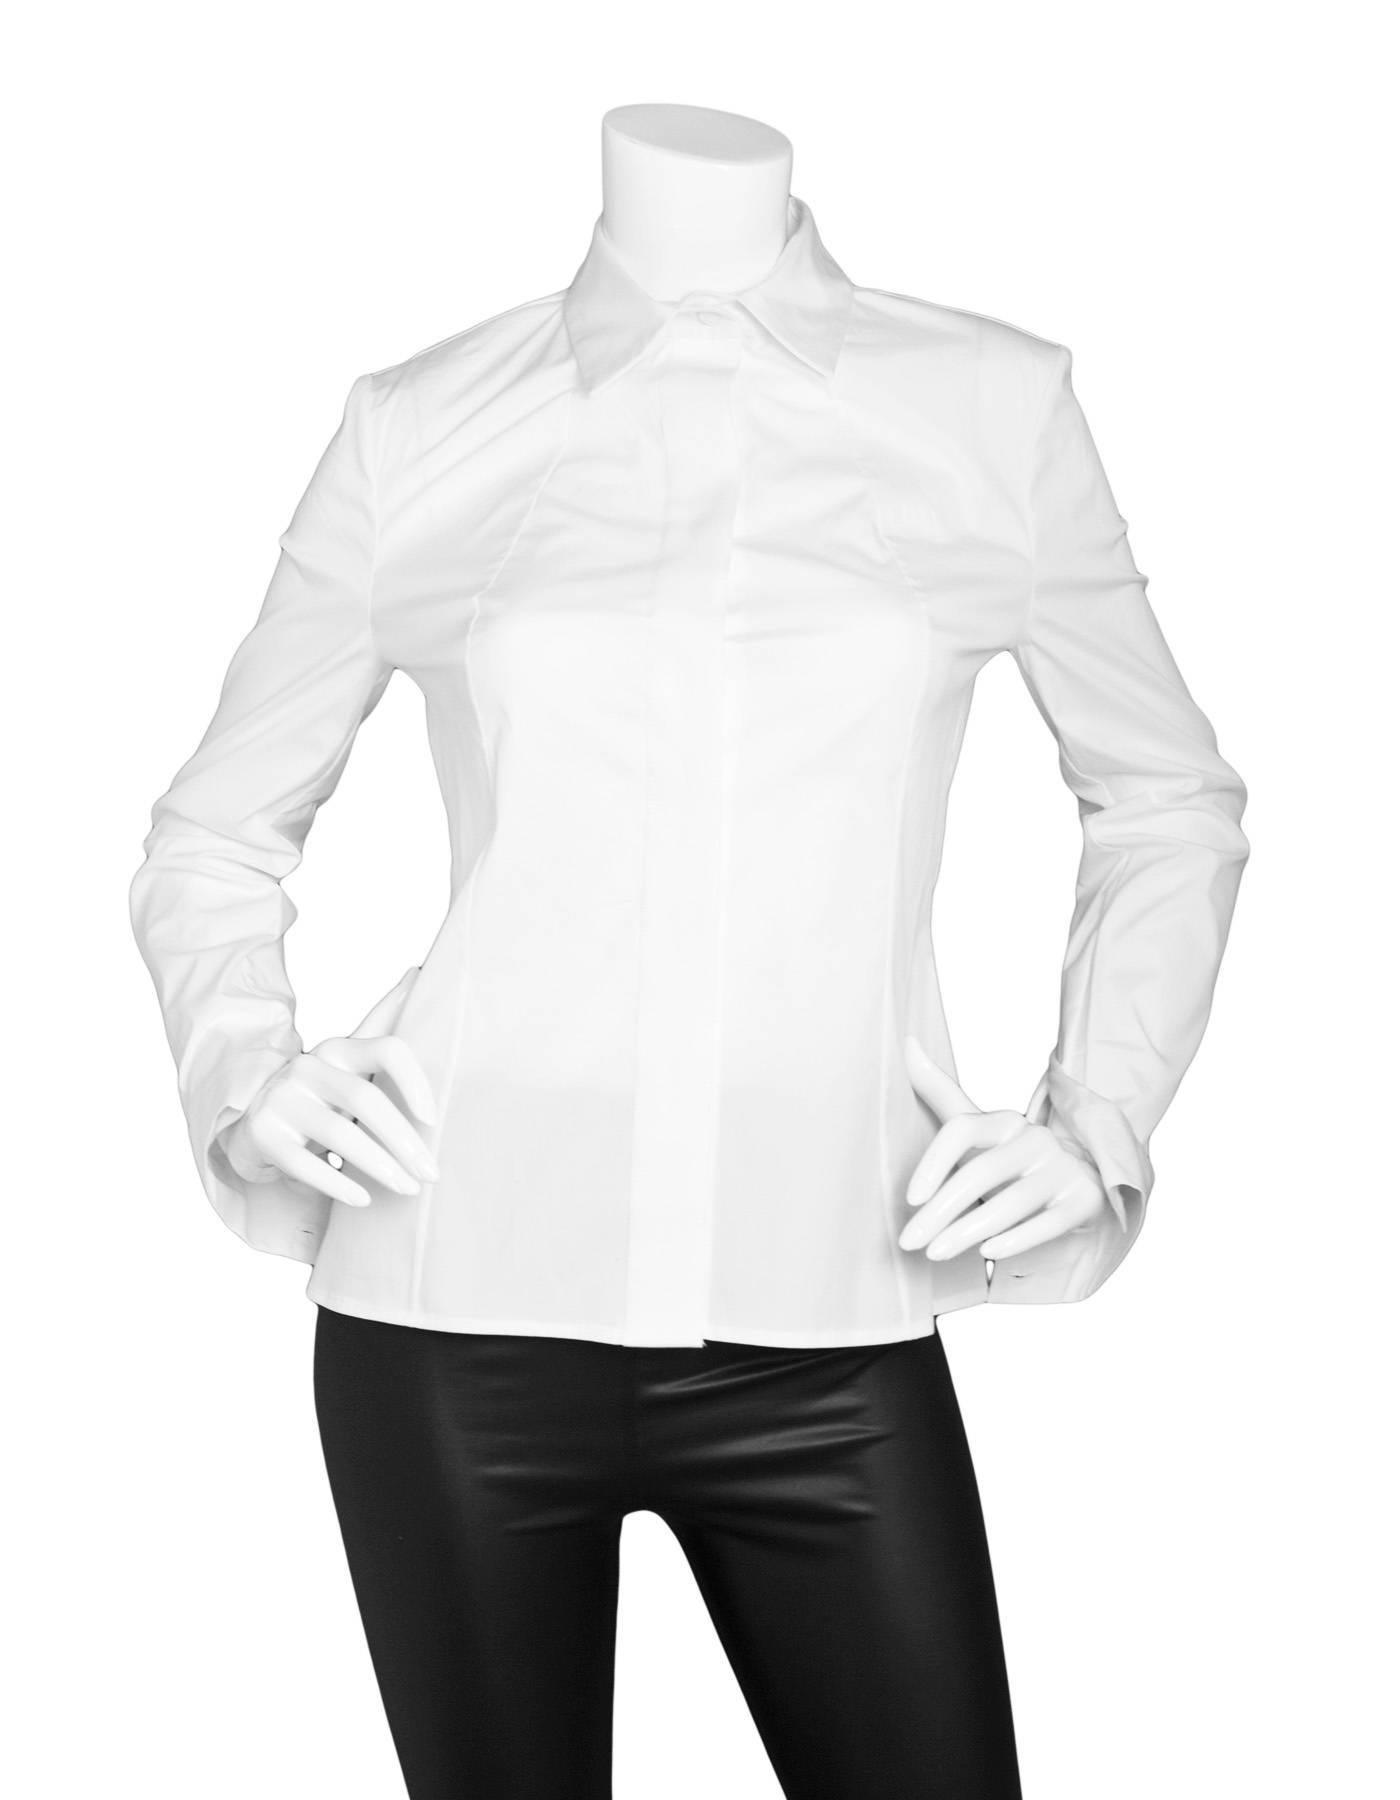 Carolina Herrera White Button Up Blouse Sz 4

Made In: USA
Color: White
Composition: Not listed, feels like cotton blend
Closure/Opening: Front button closure
Overall Condition: Excellent pre-owned condition

Marked Size: US 4
Bust: 32"
Waist: